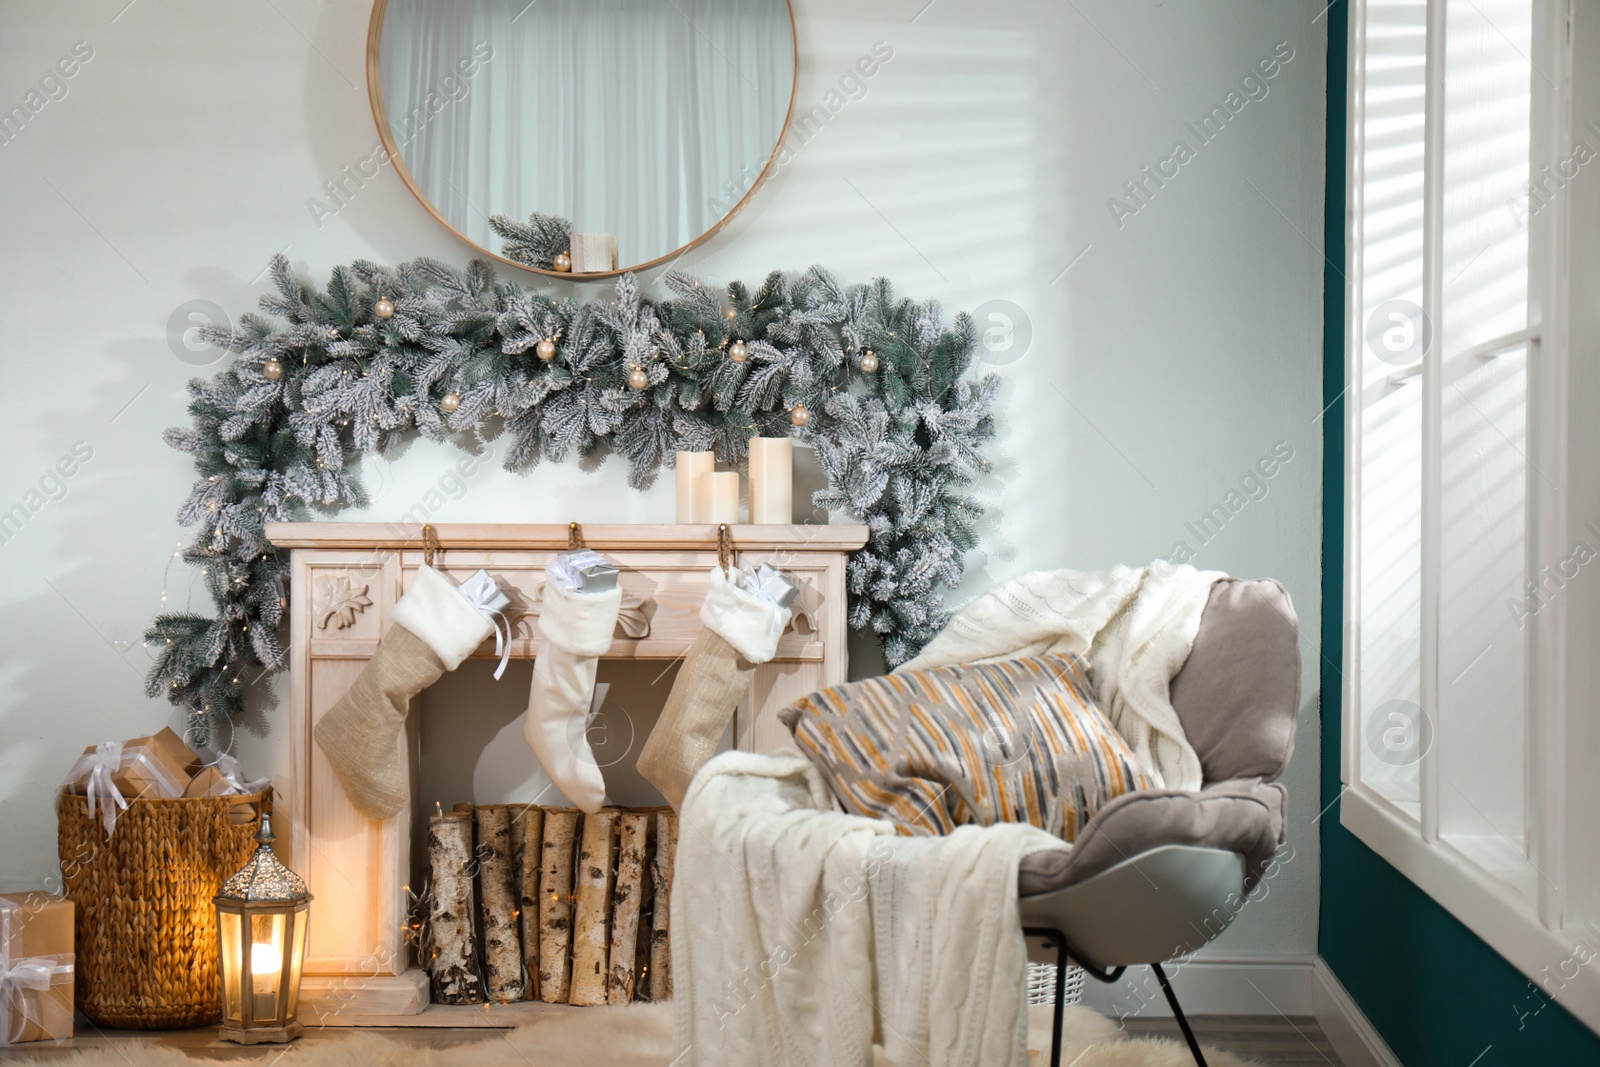 Photo of Fireplace with Christmas stockings in festive room interior